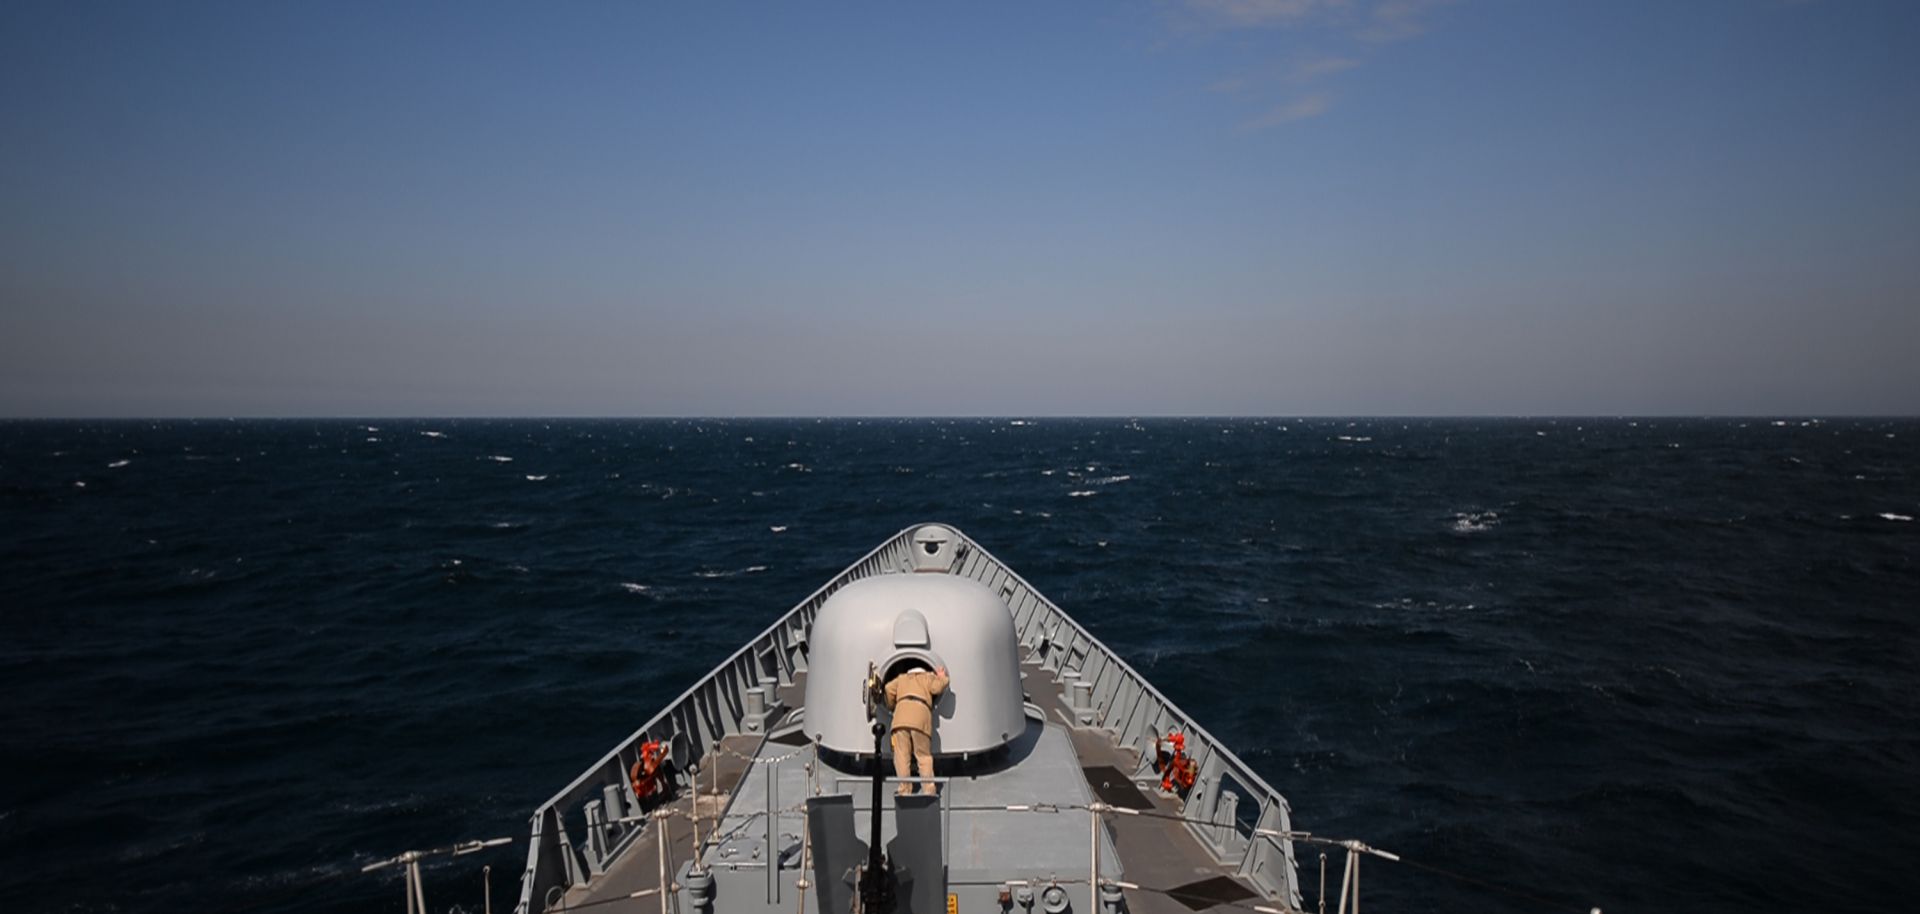 A navy man inspect a cannon on a ship in the Black Sea.